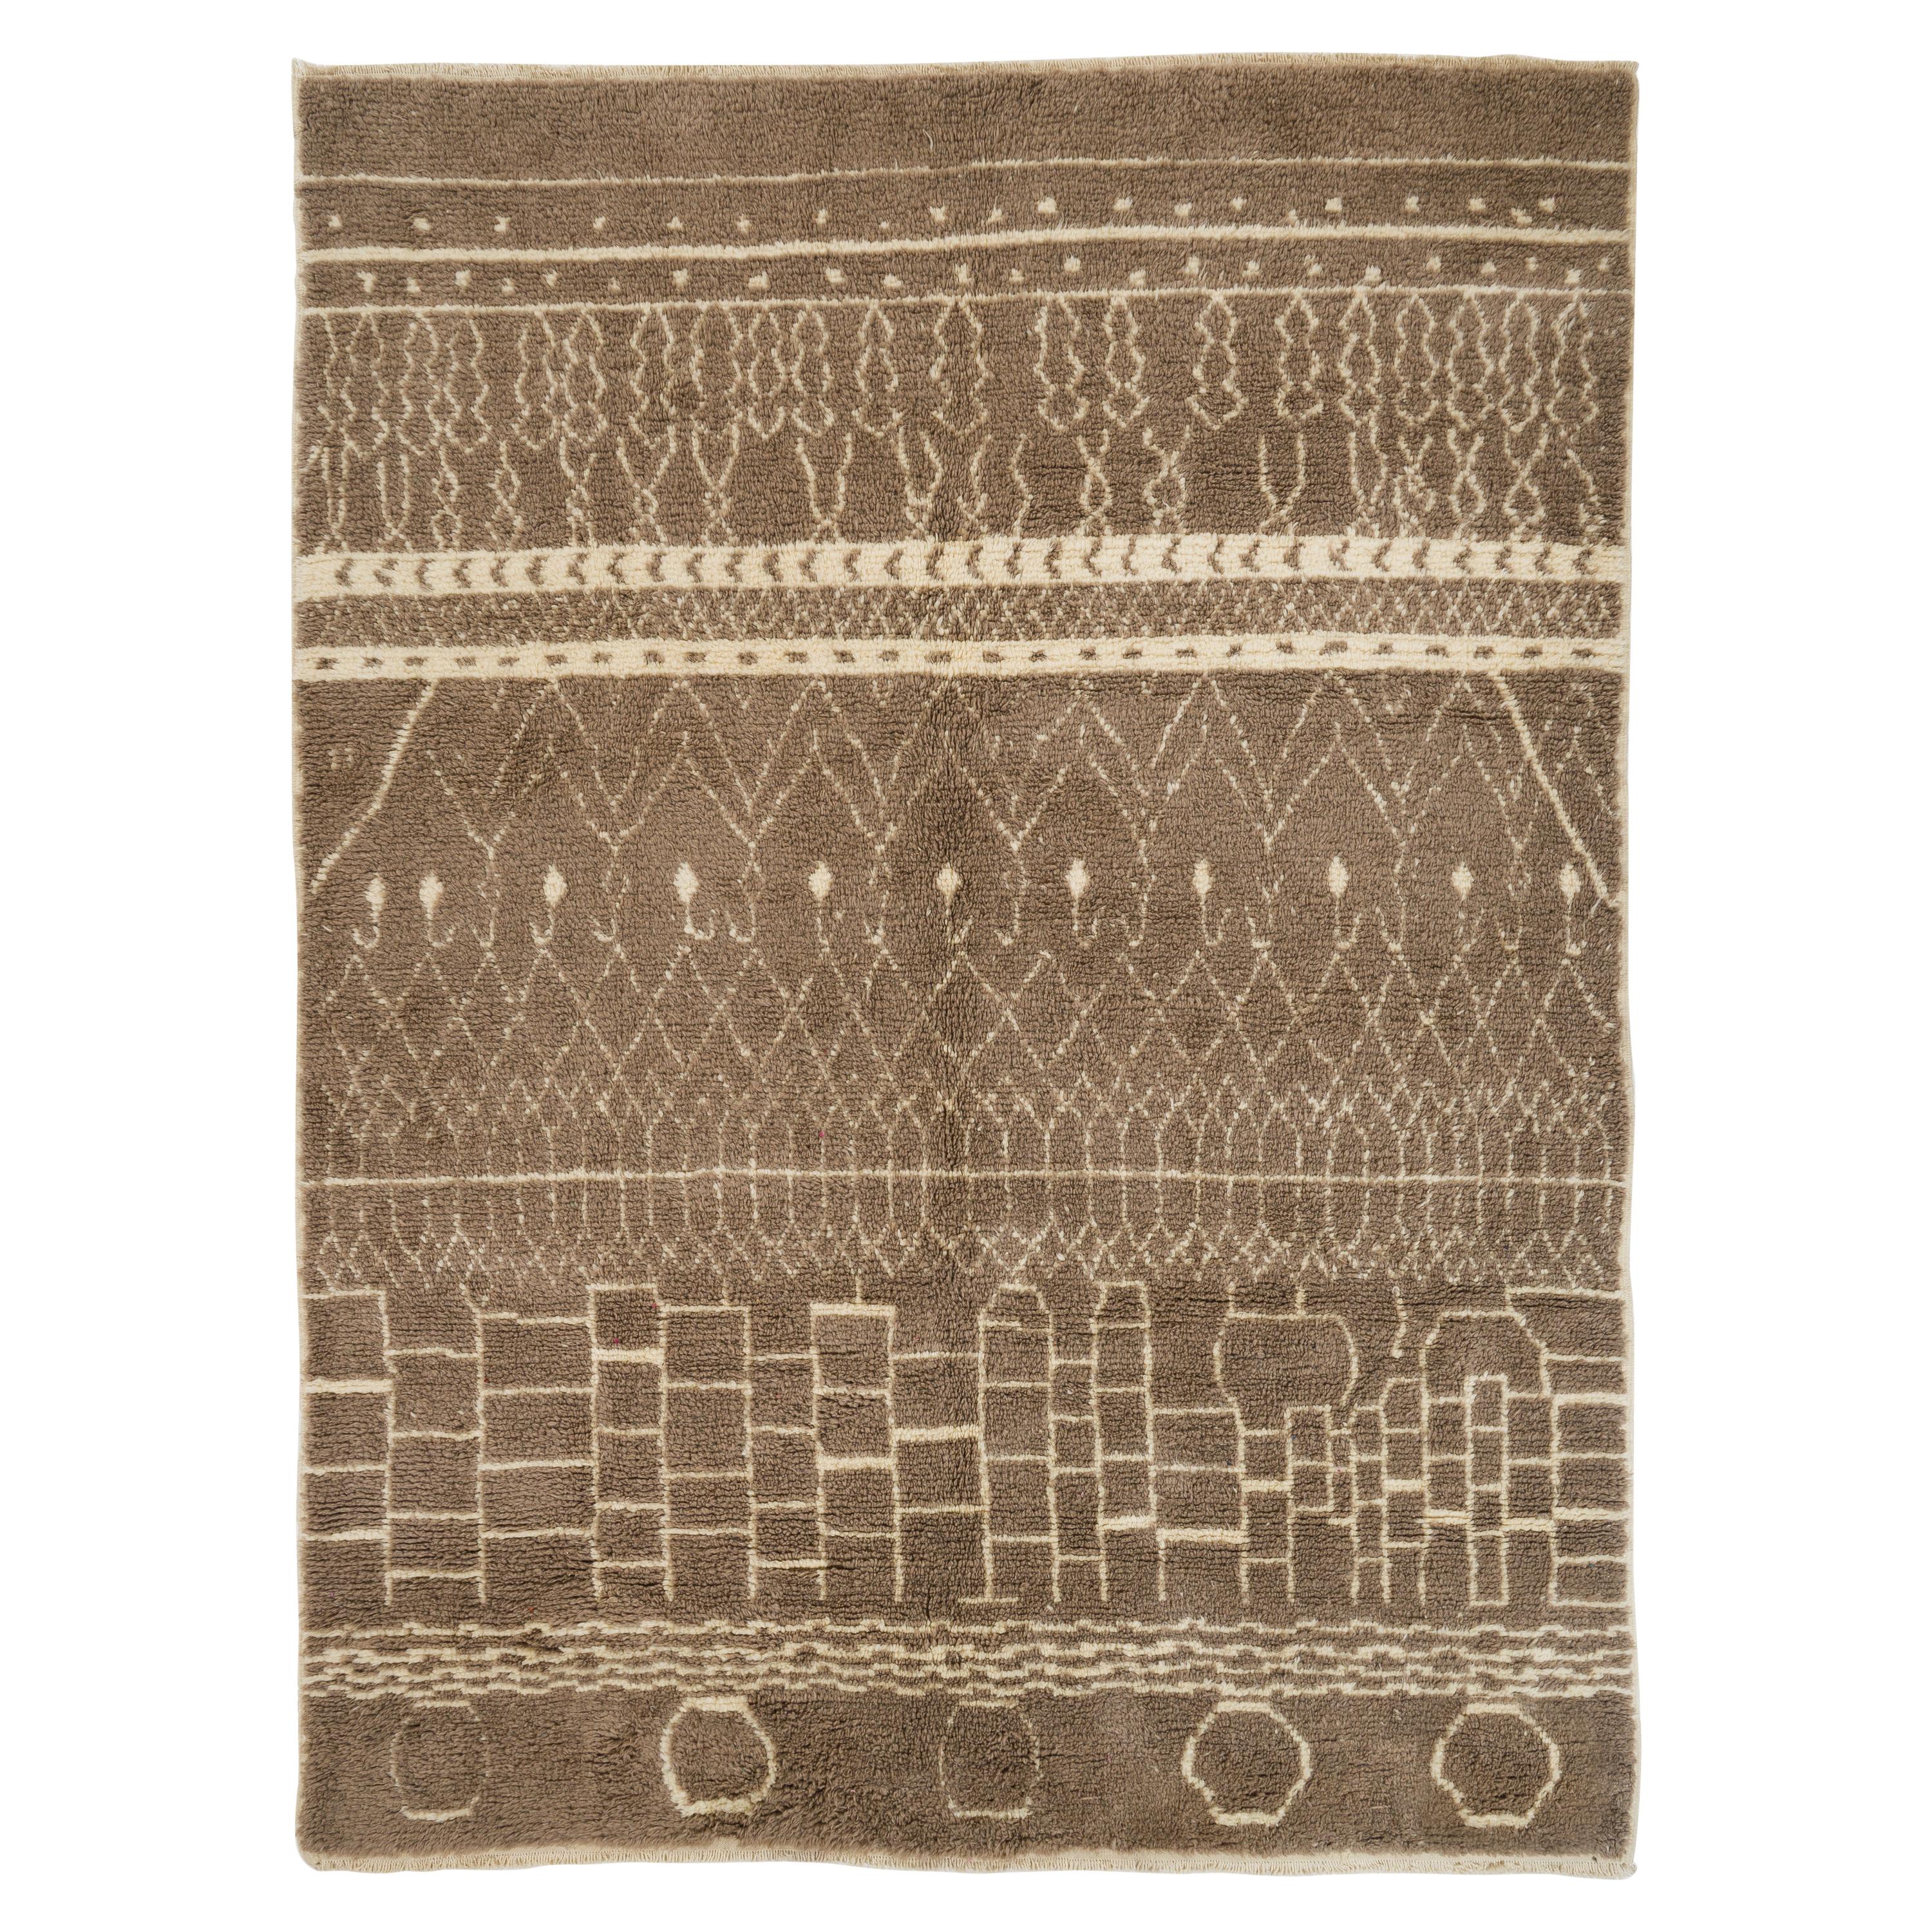 Moroccan Beni Ourain Rug, 100% Natural Undyed Wool For Sale